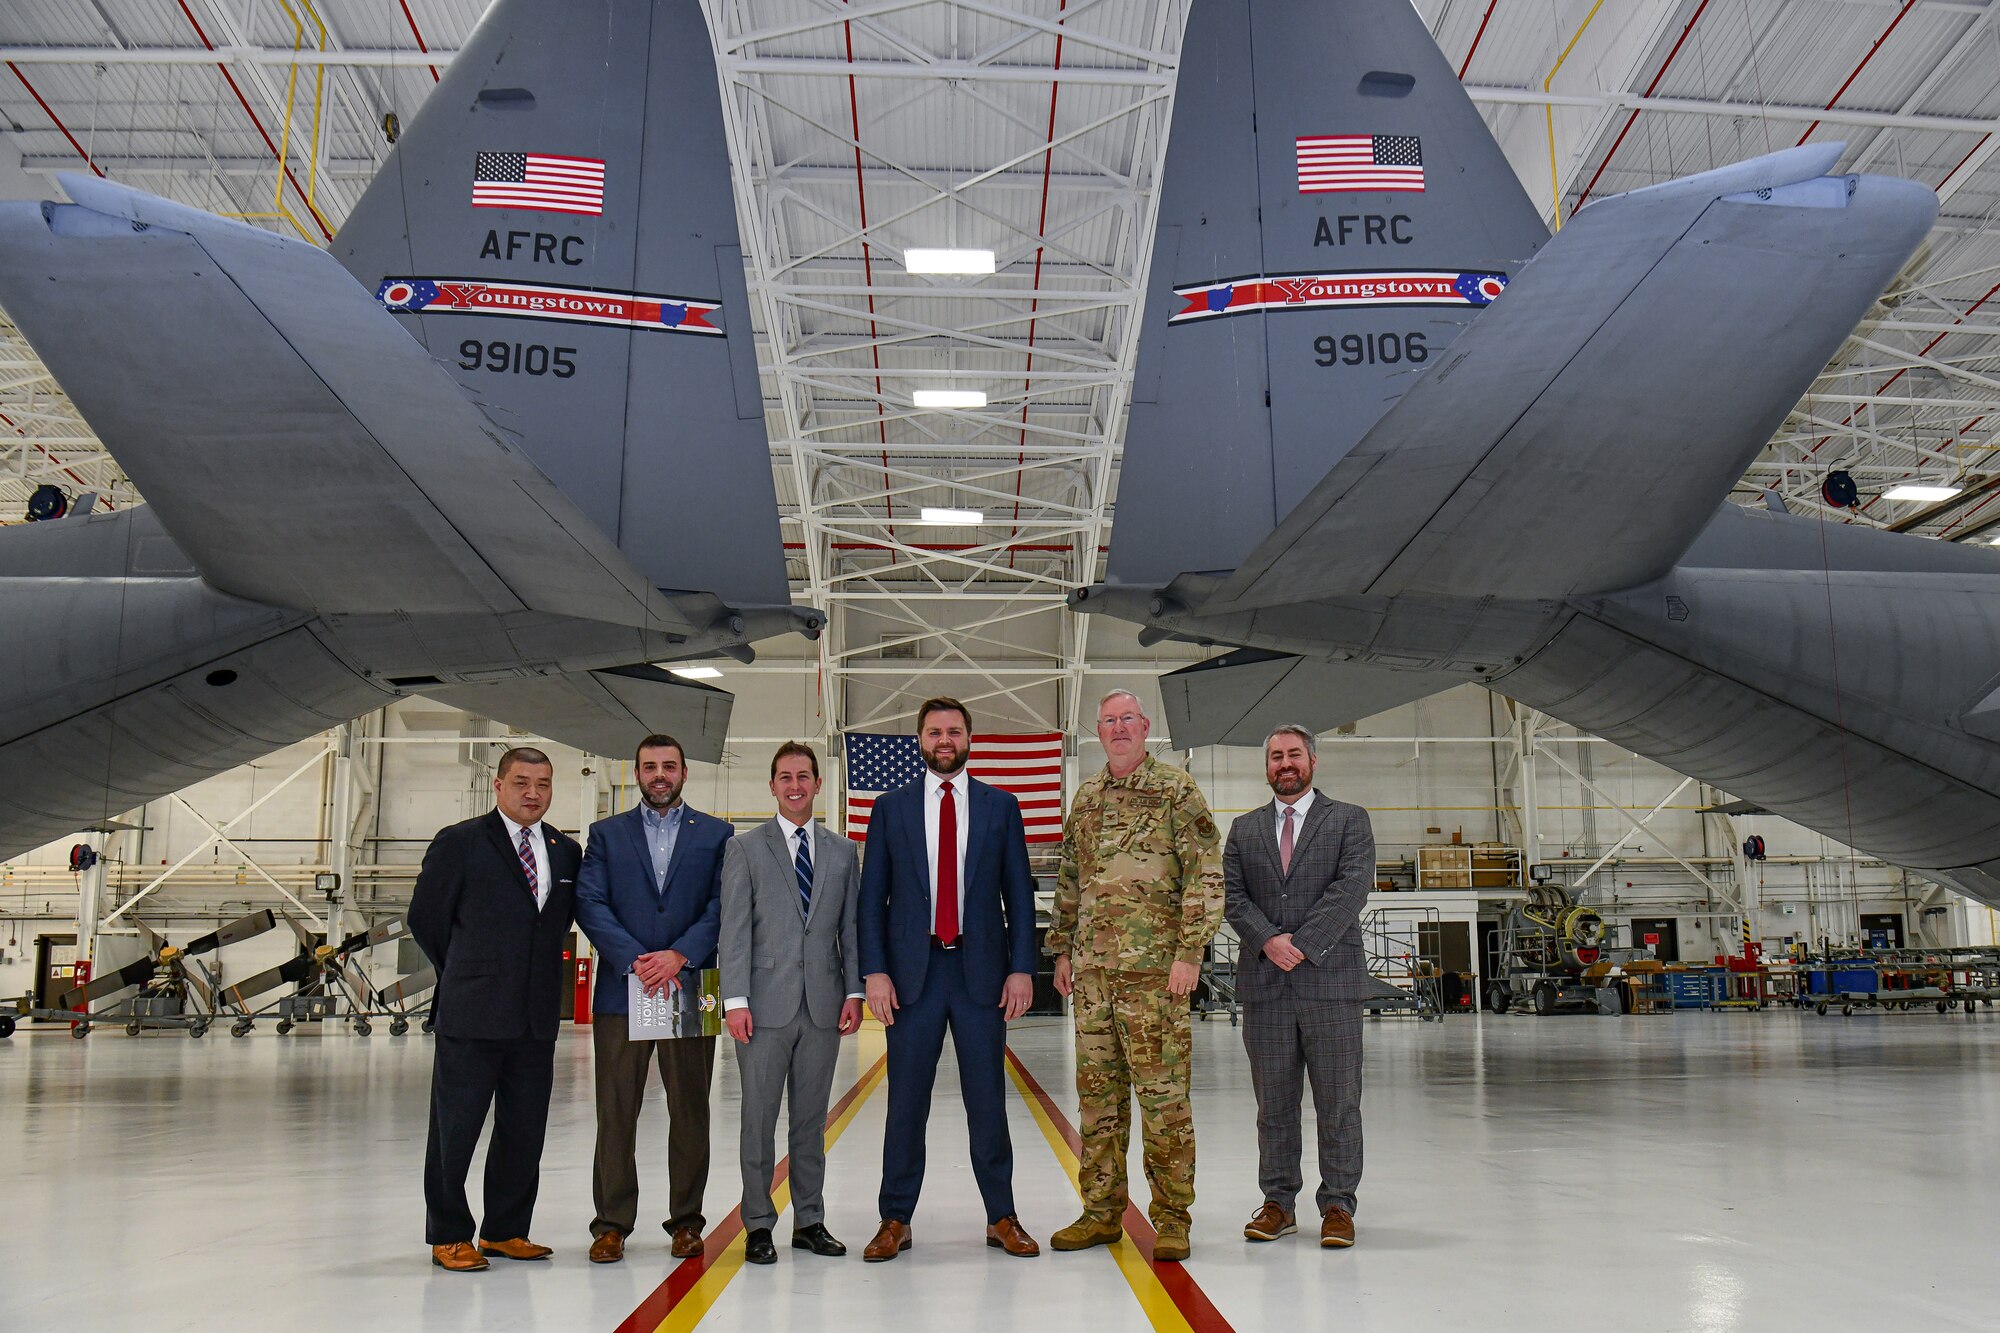 U.S. Sen. JD Vance, representing Ohio, Col. Jeff Van Dootingh, commander of the 910th Airlift Wing, and staff members pose for a photo on Jan. 17, 2023, at Youngstown Air Reserve Station, Ohio.